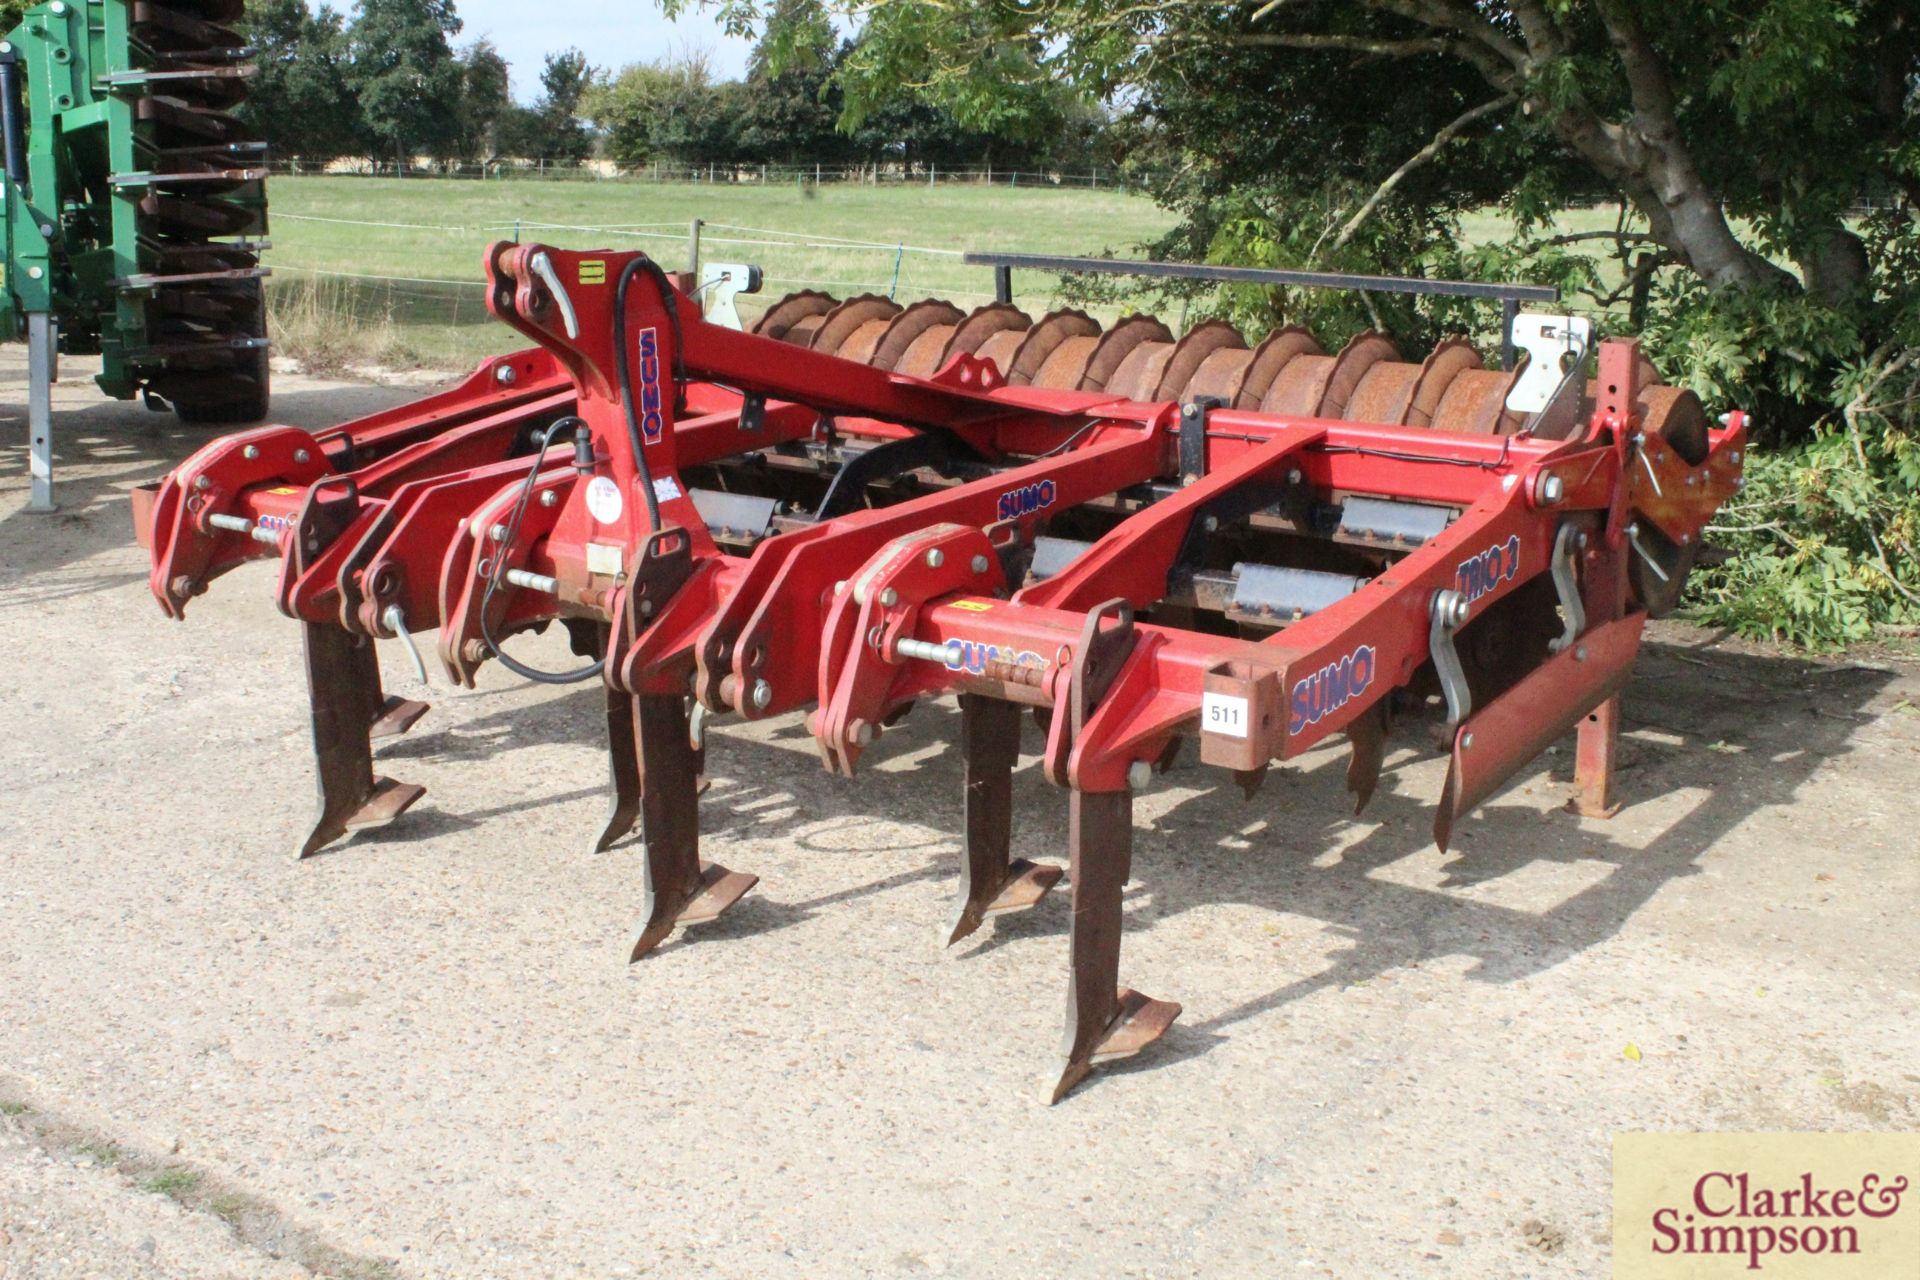 Sumo Trio 3 3m mounted cultivator 2012. Serial number 11626. With six Metcalfe low disturbance legs, - Image 2 of 21